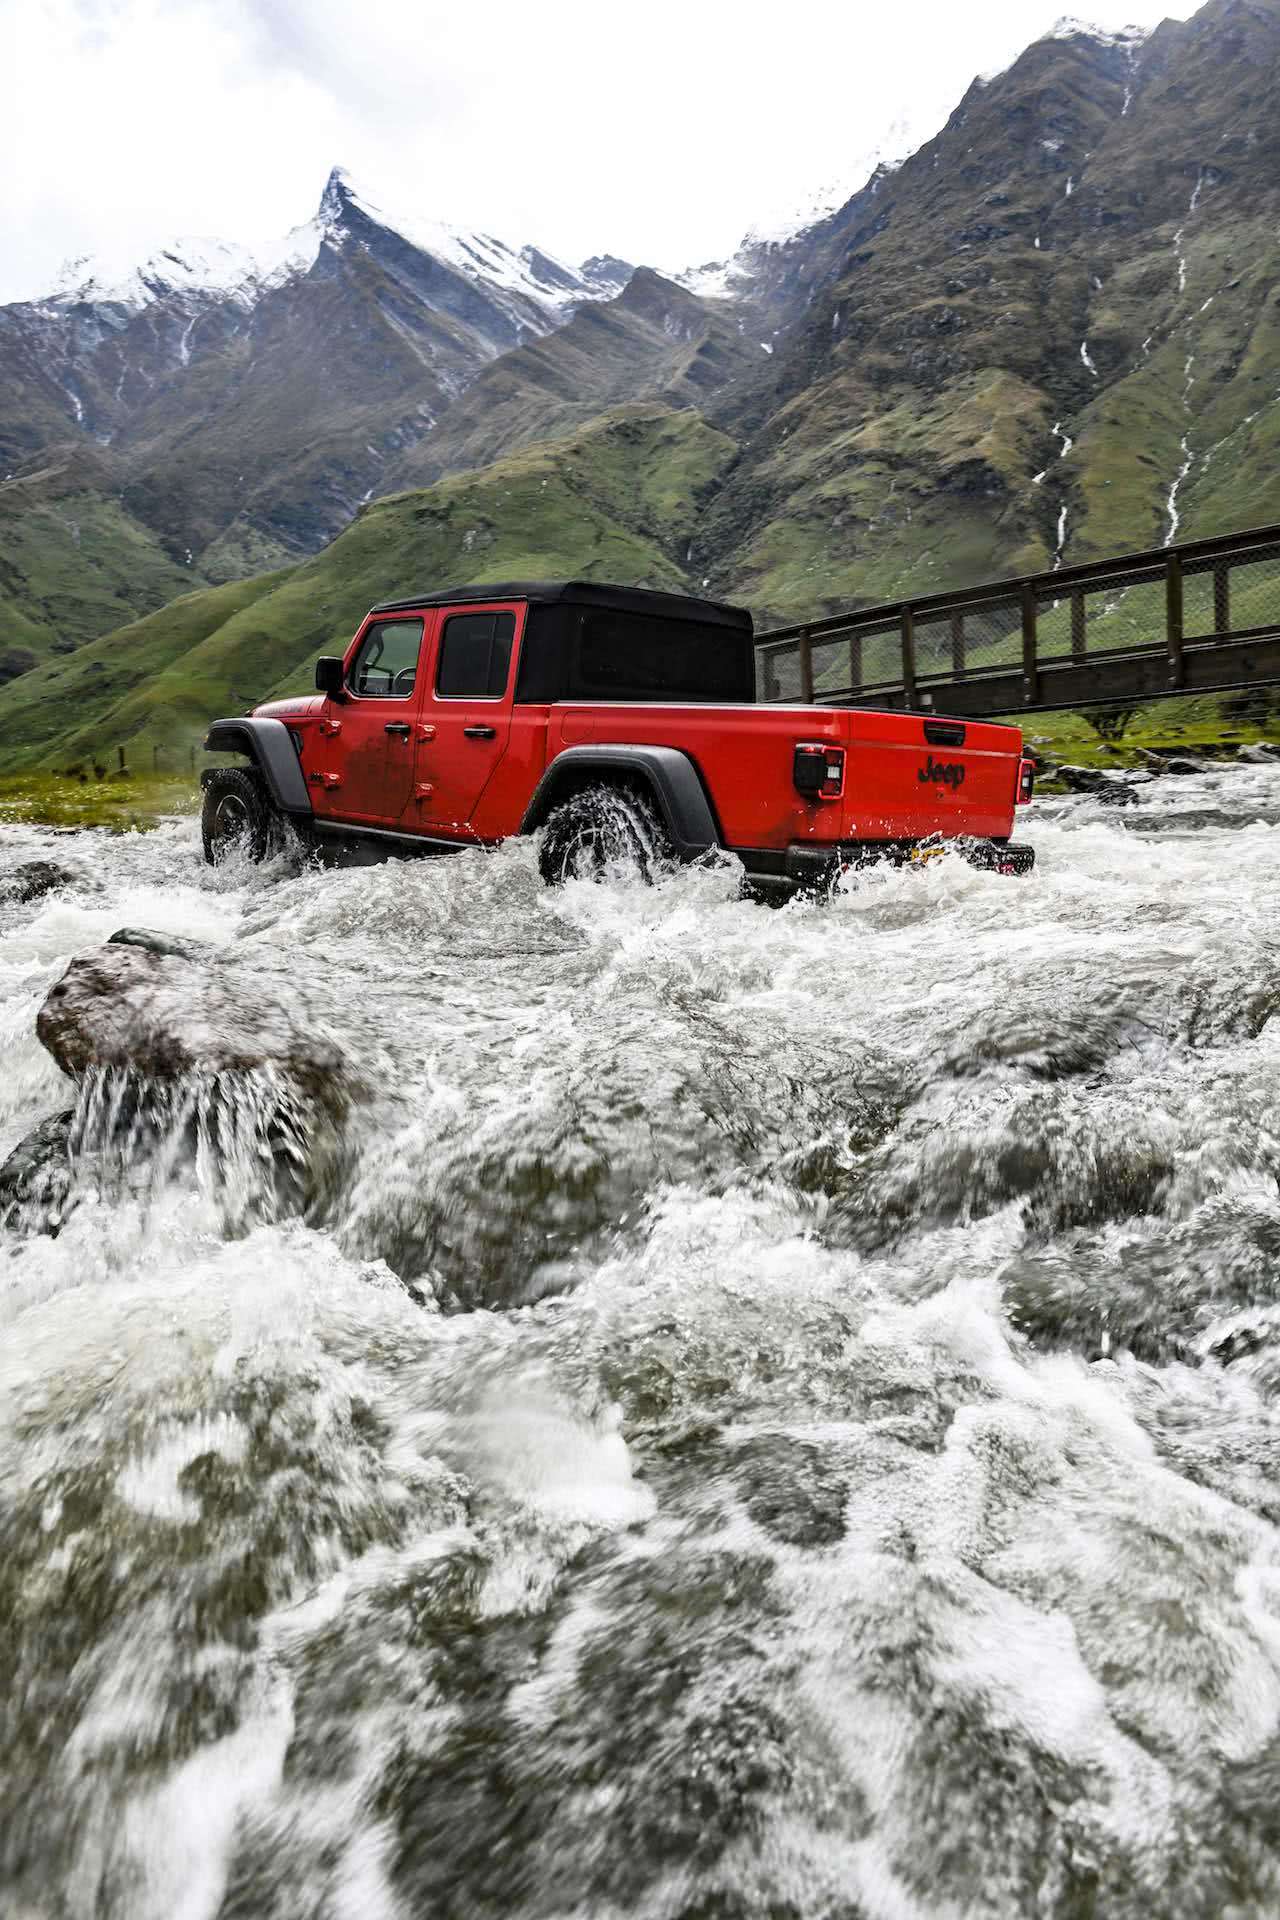 Roof-Off Off-Road In Jeep’s New Open-Air Ute, Jeep Gladiator, queenstown, New Zealand 2019